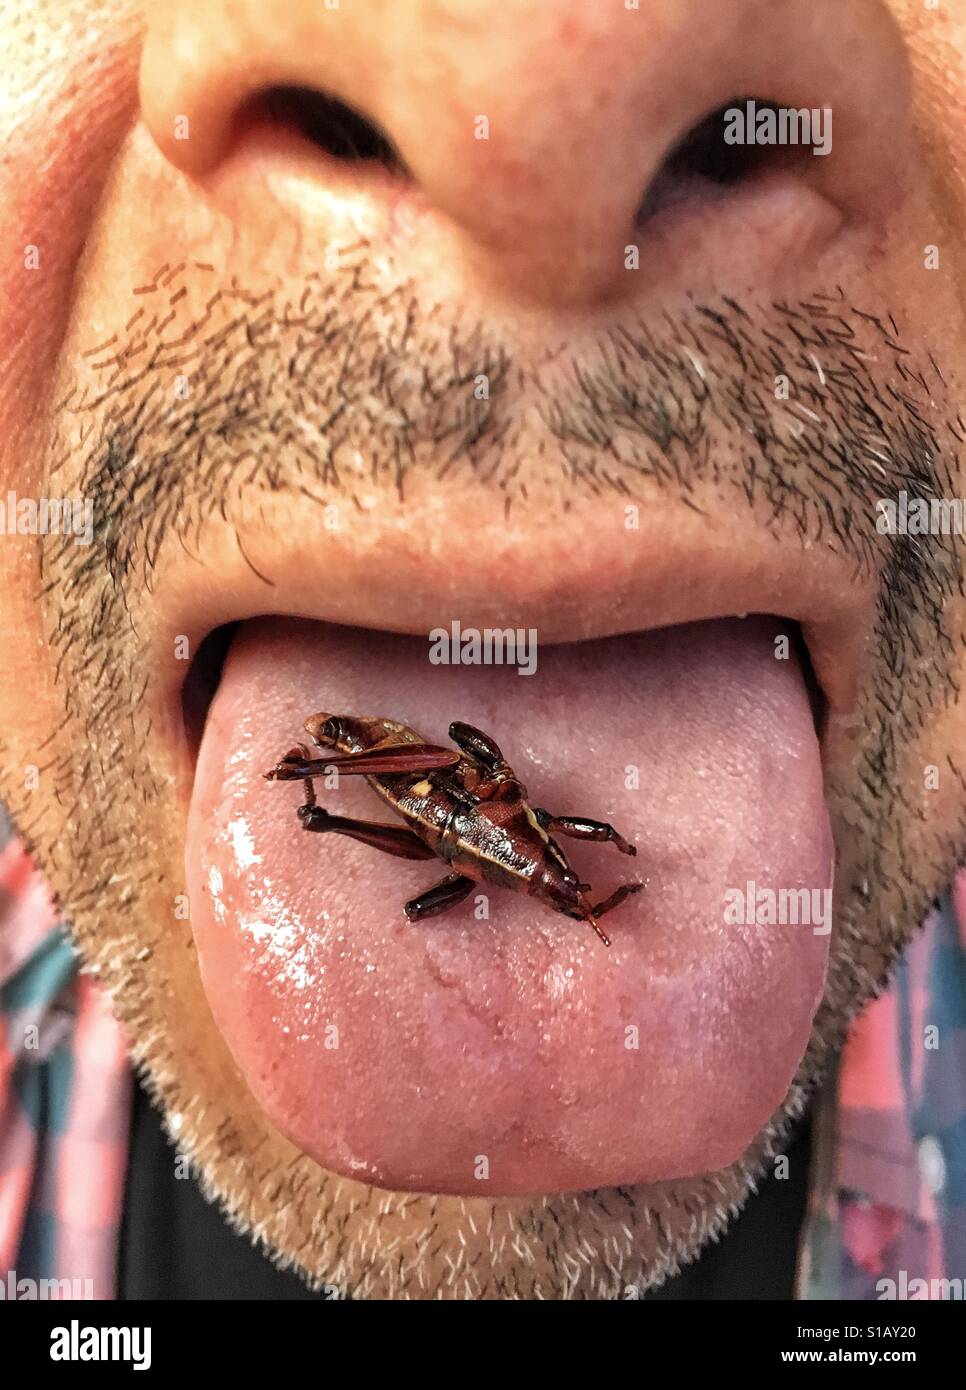 Man eating Chapulines - fried grasshoppers in Oaxaca City, Mexico Stock Photo